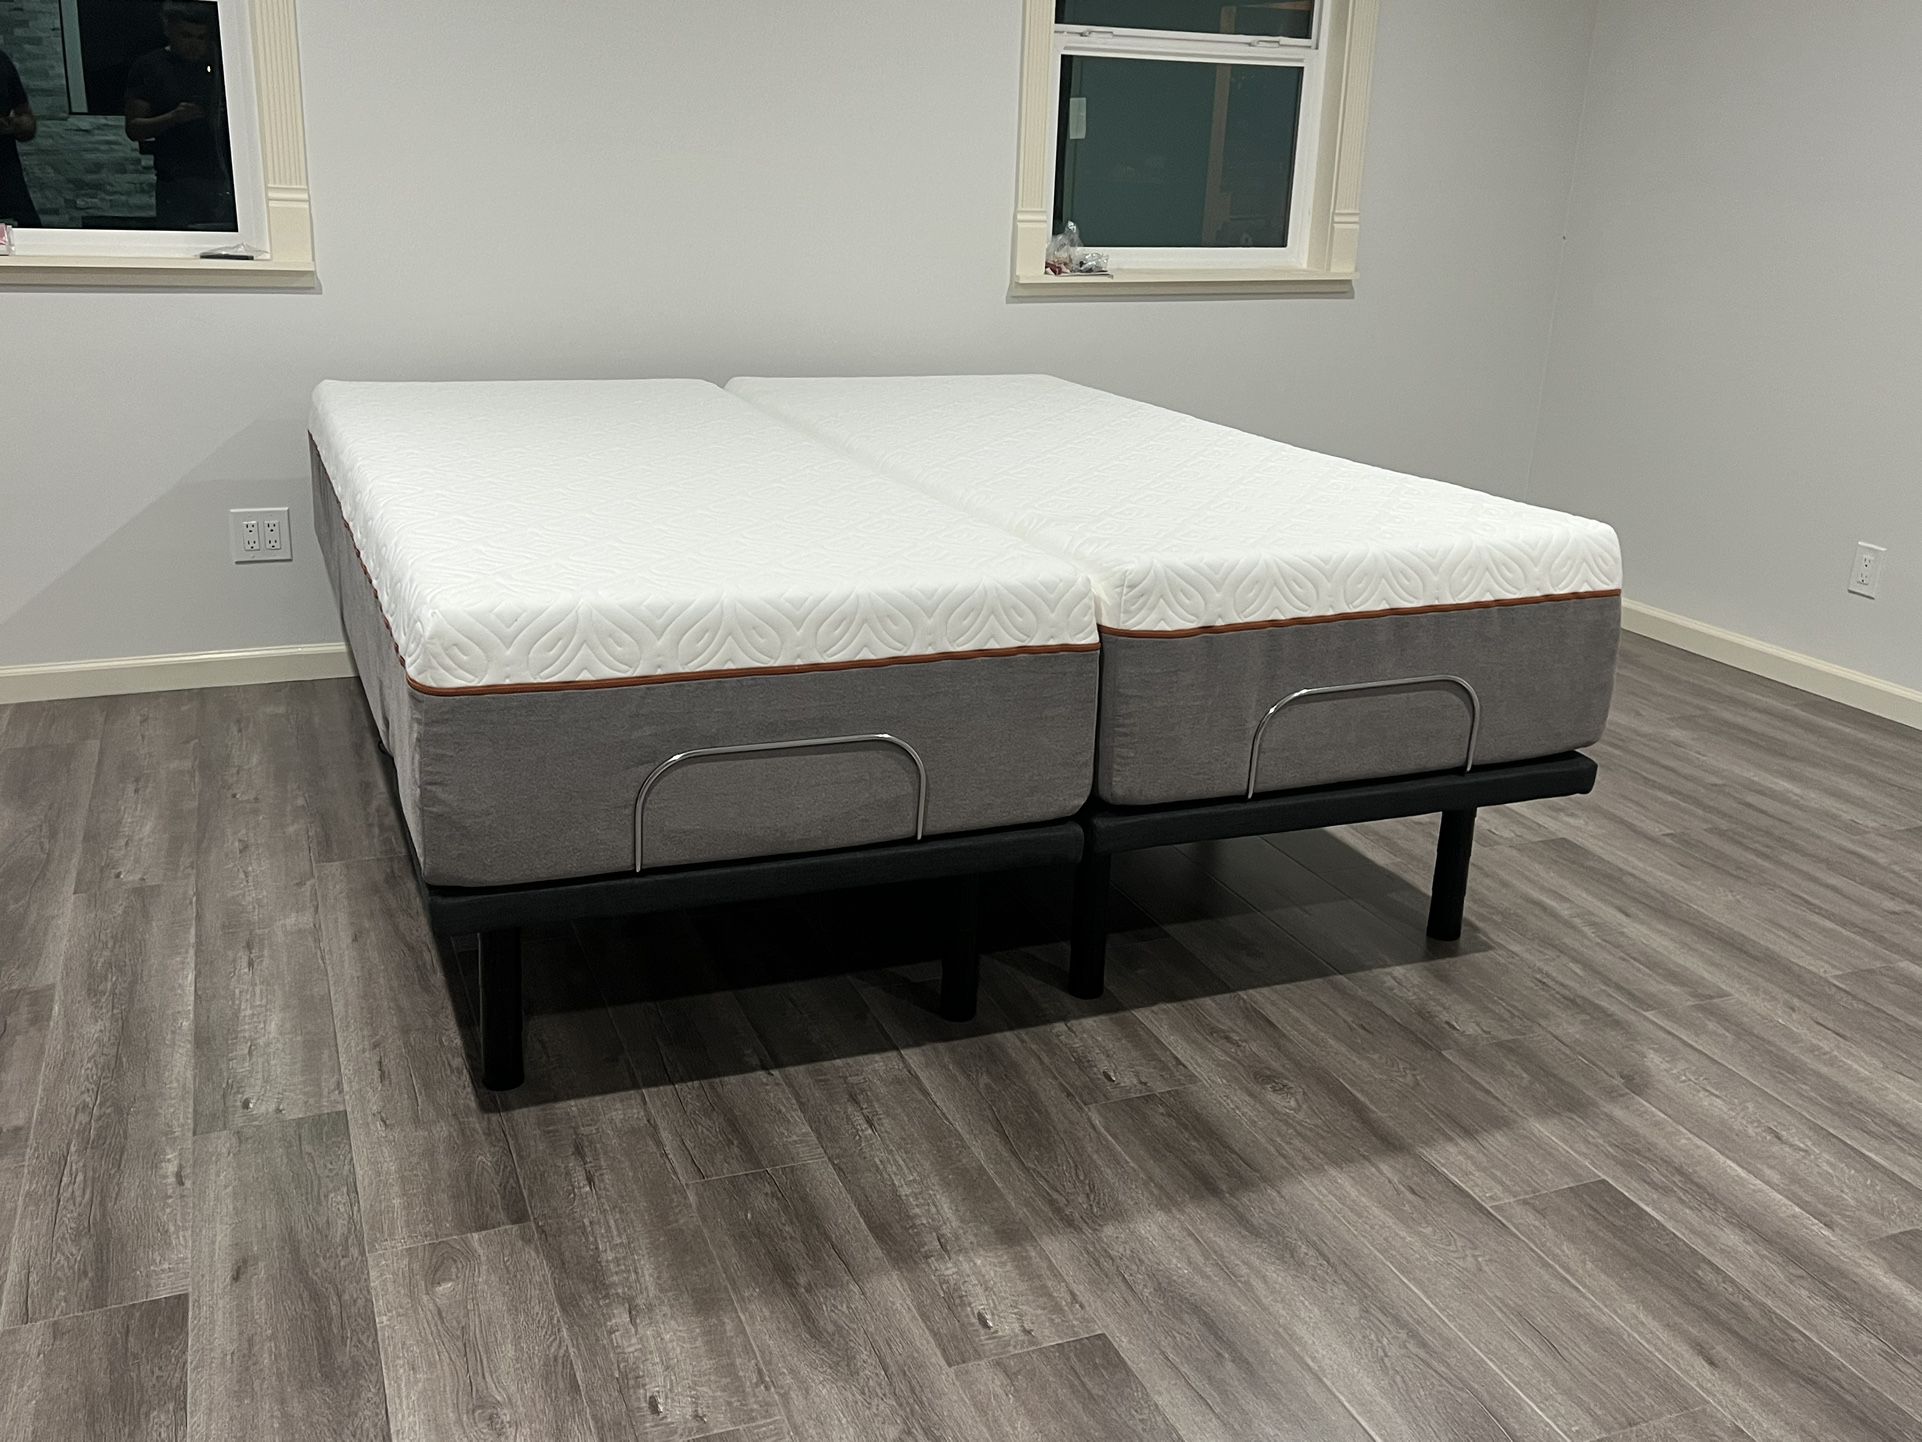 Sleep Science adjustable bed with massage! King size bed 